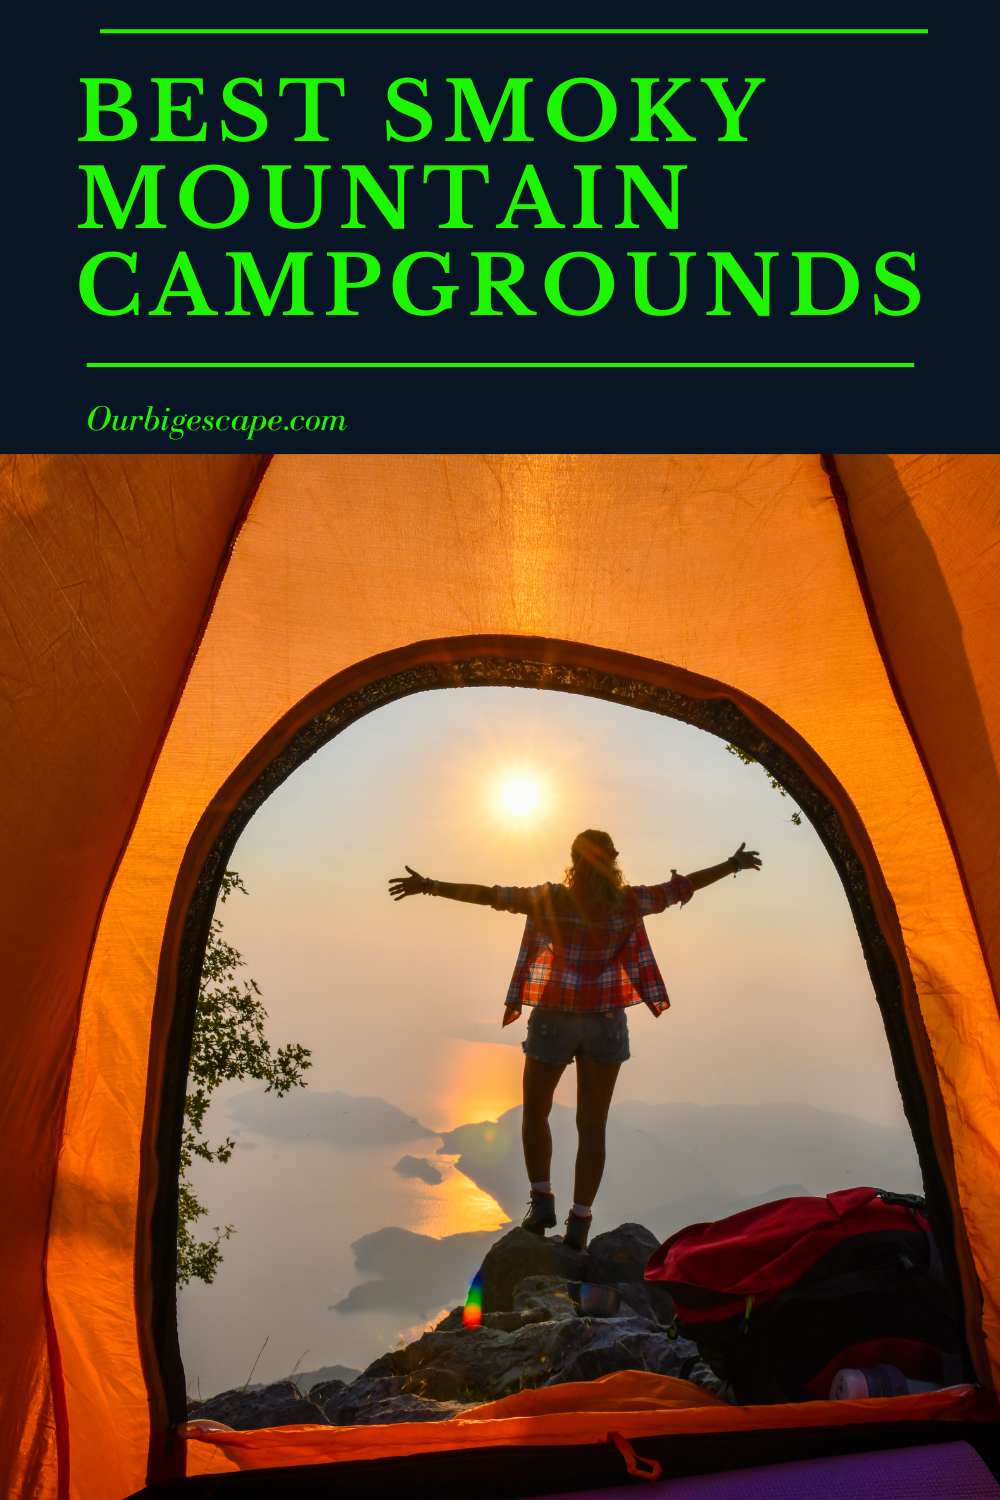 Best Smoky Mountain Campgrounds (5)